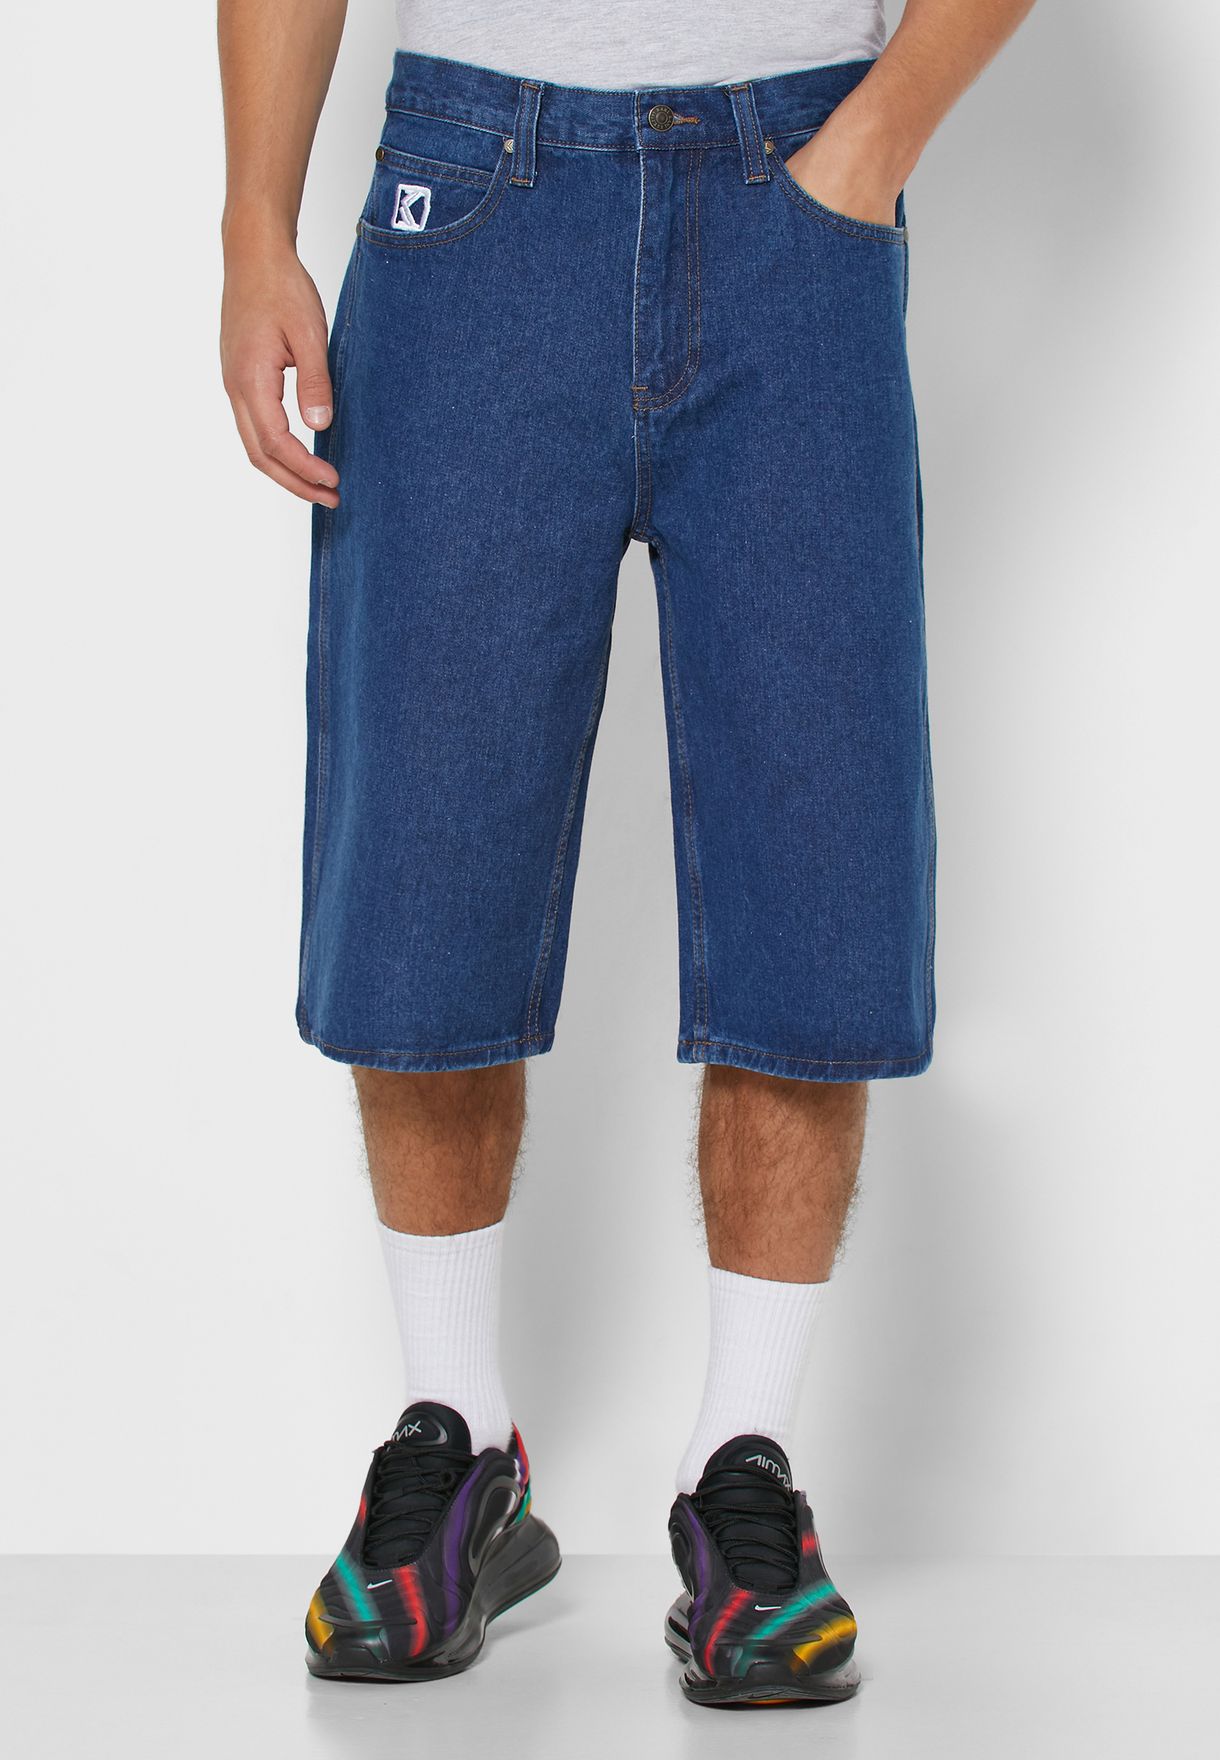 low rise jean shorts